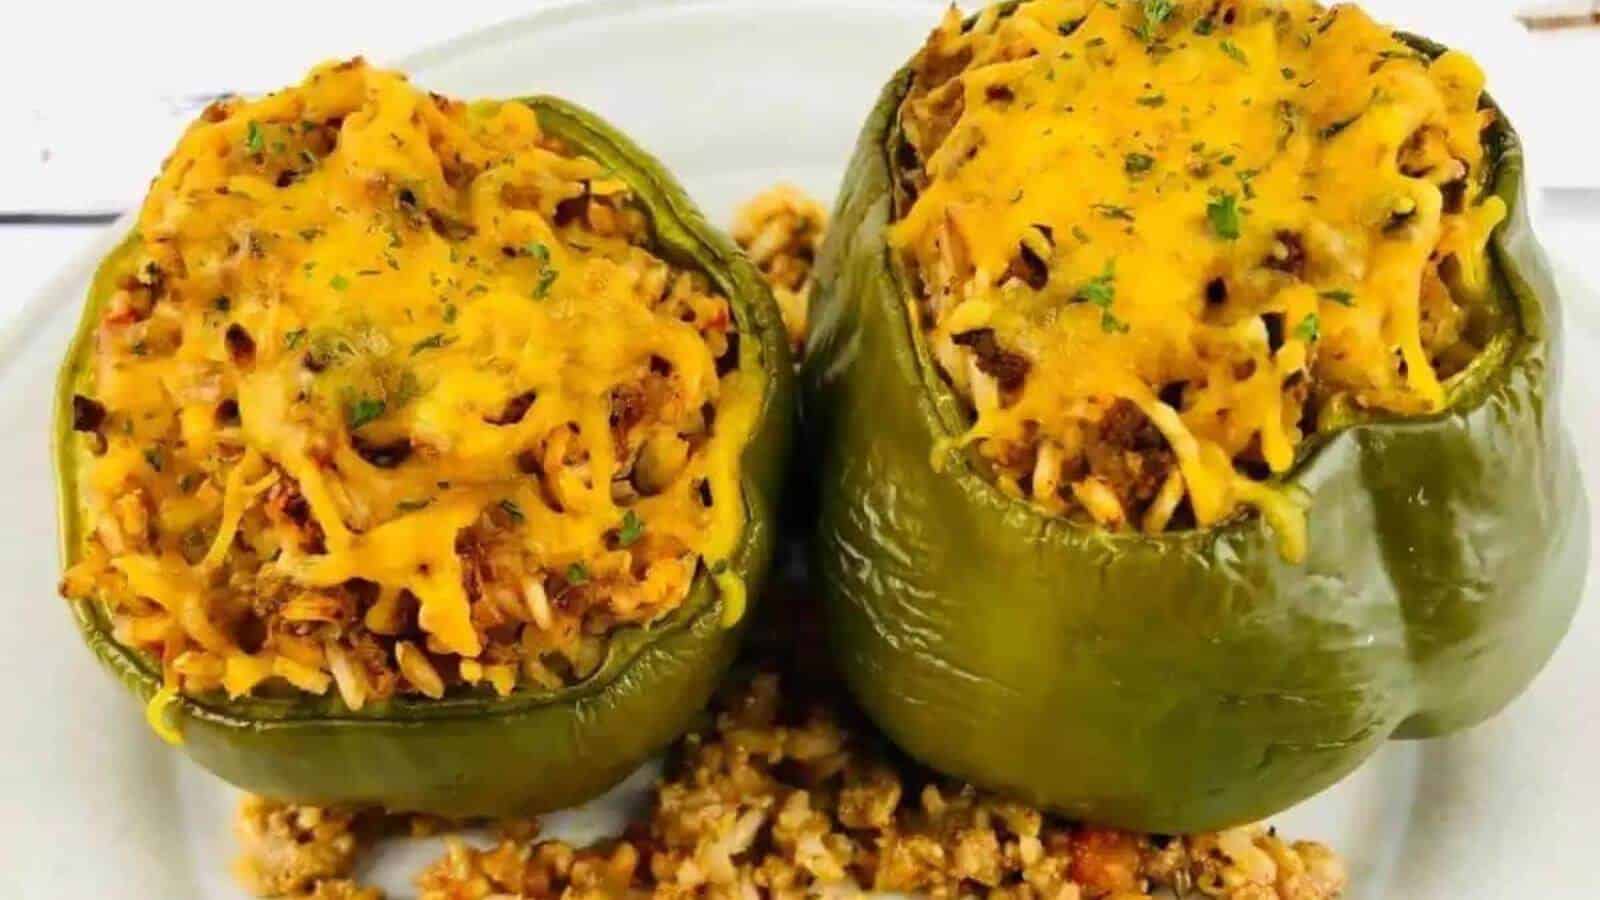 Two stuffed green peppers on a plate.